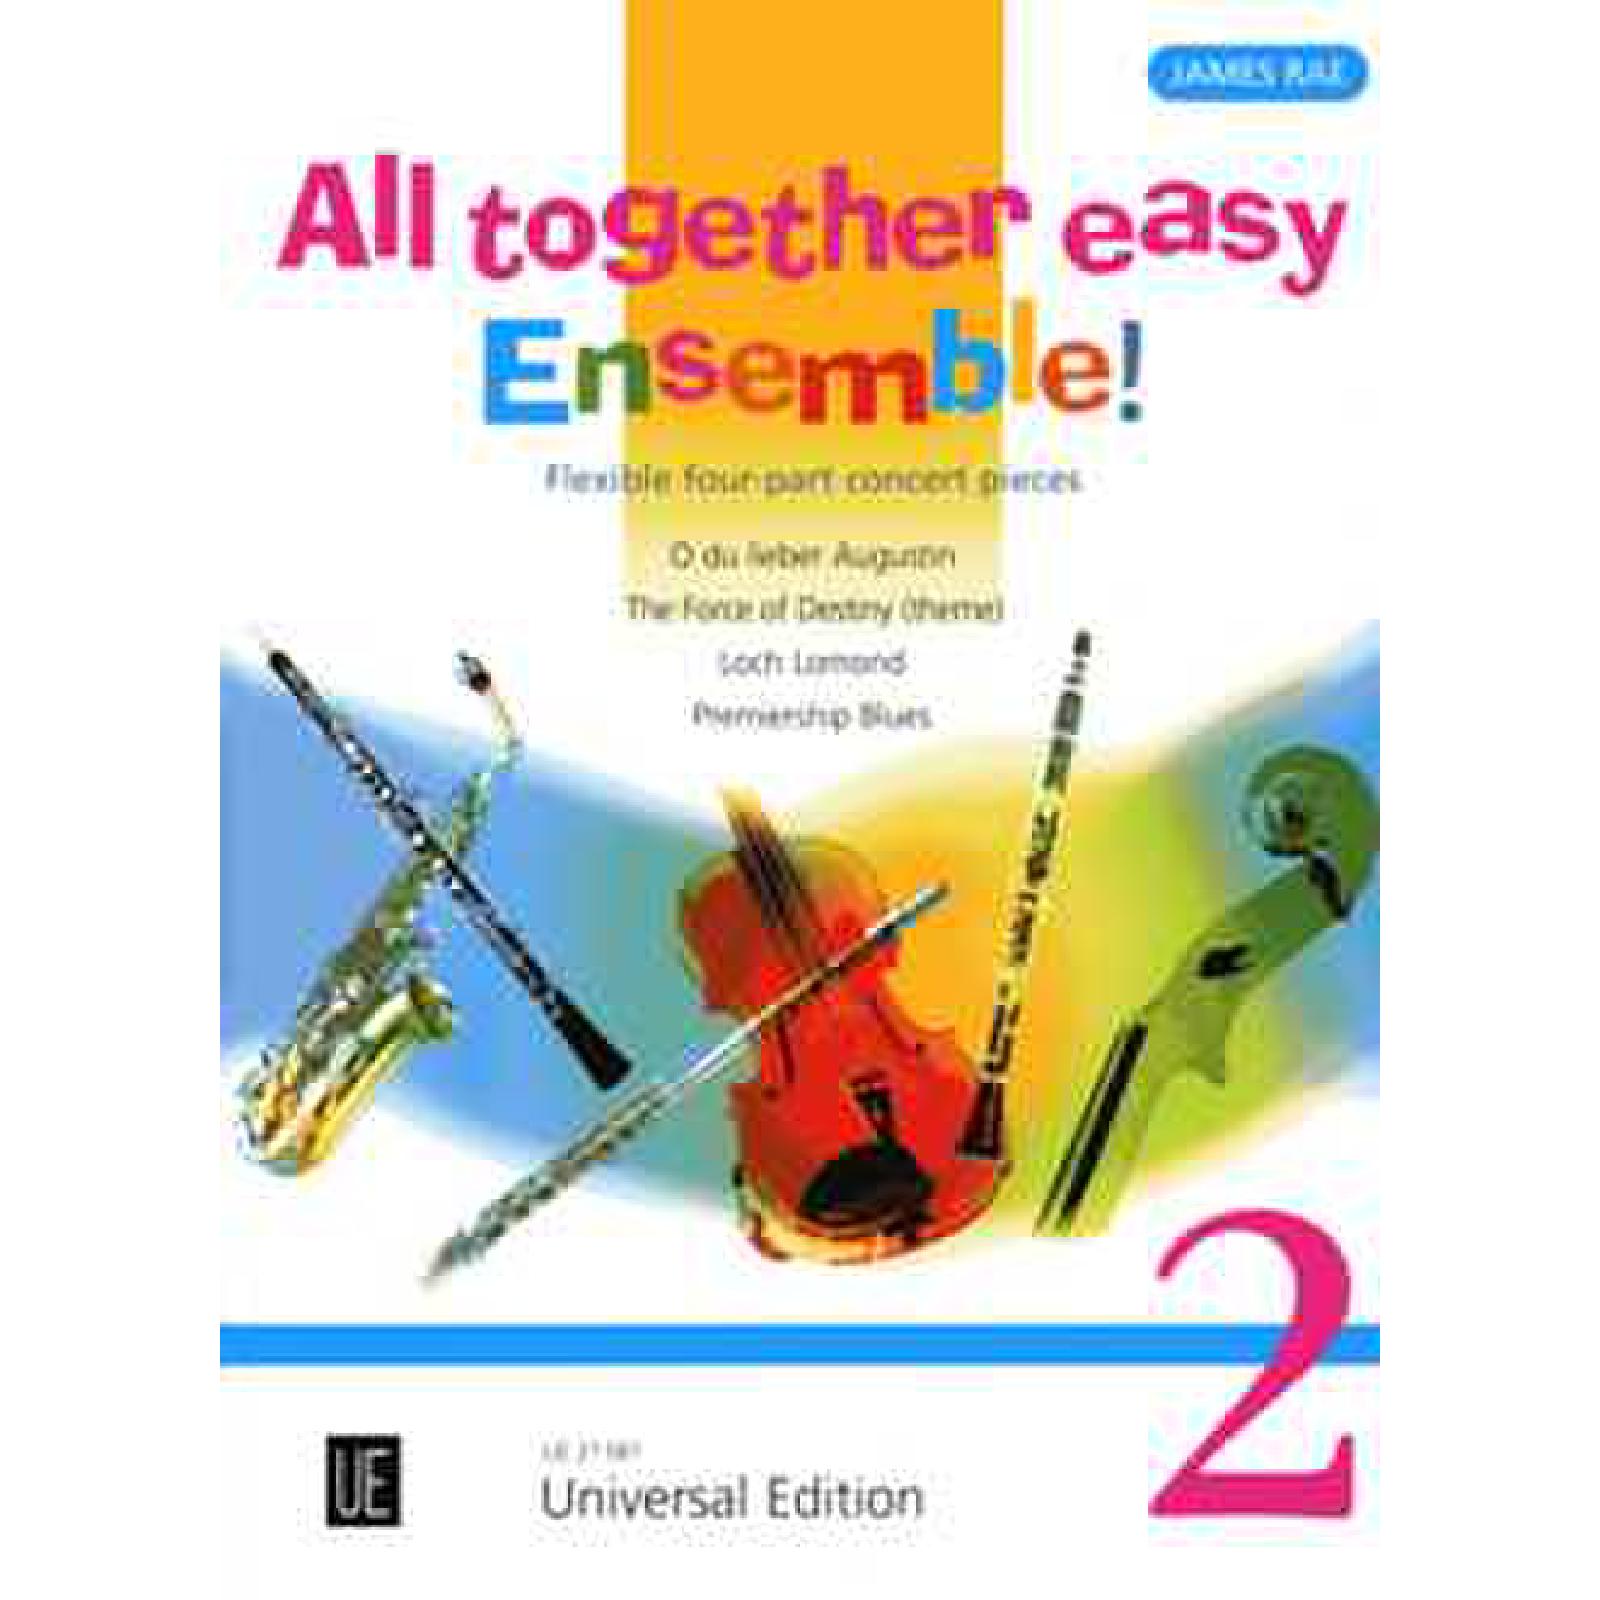 All together easy Ensemble 2 - Flexible 4 Part